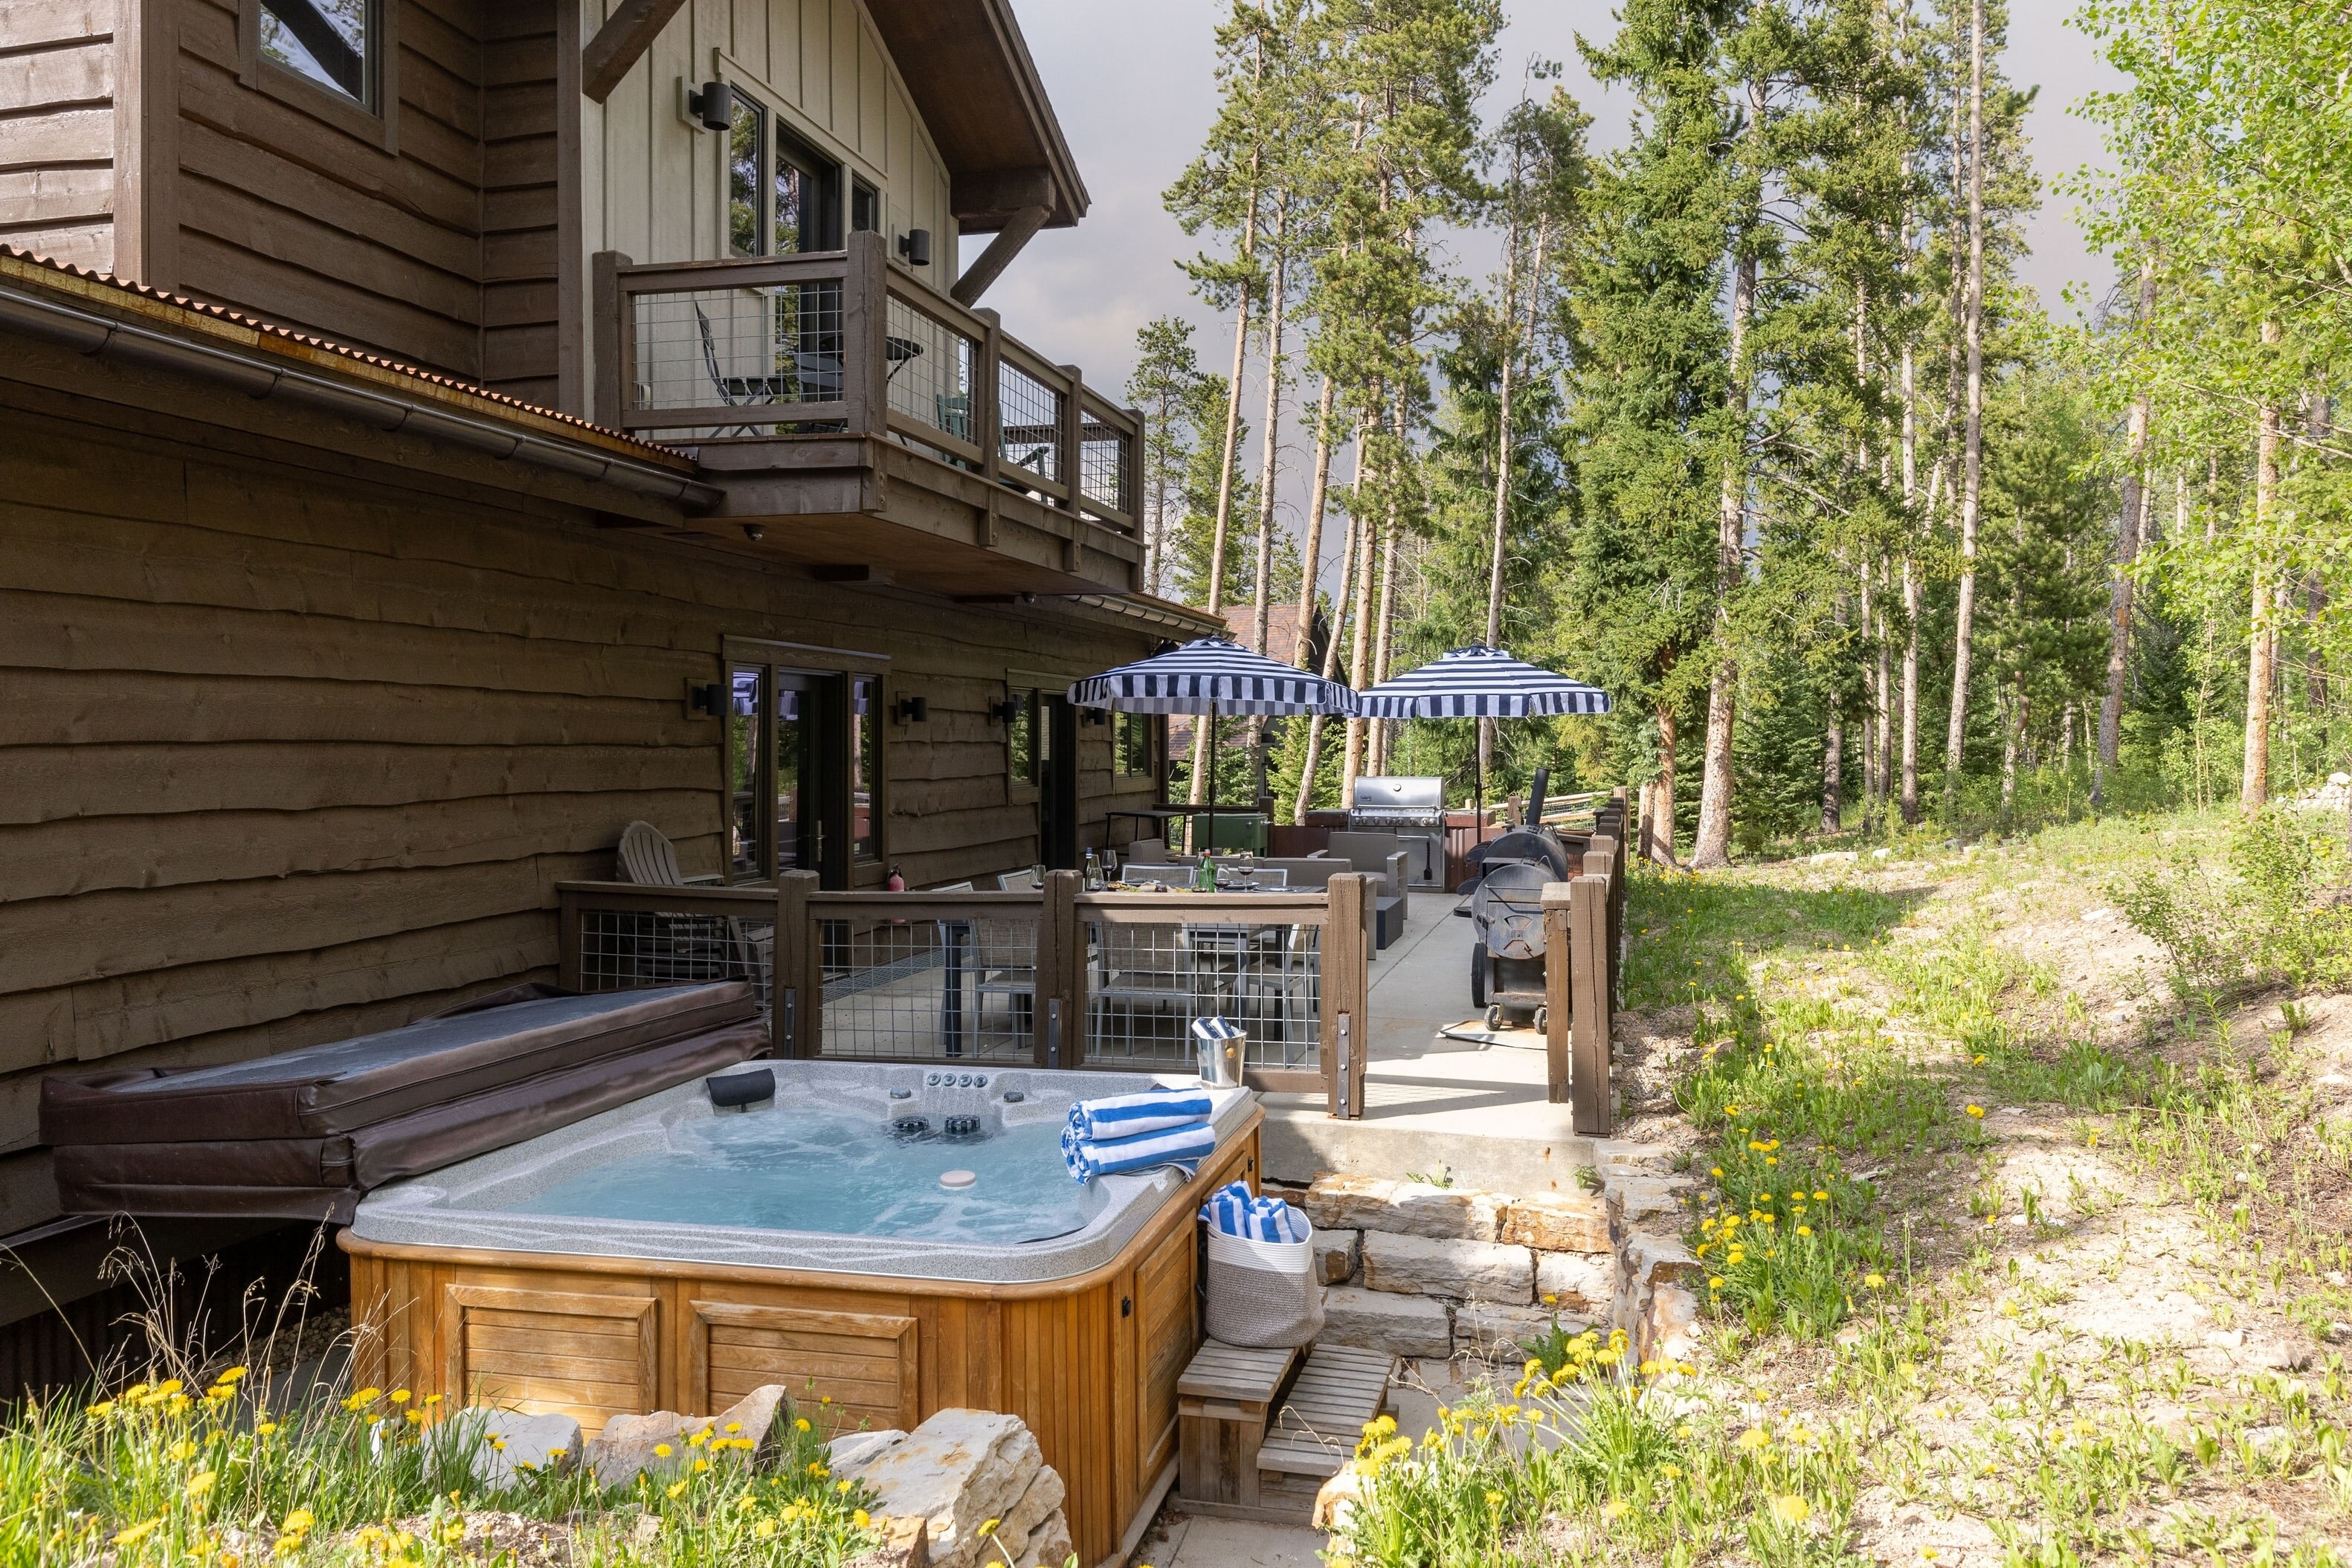 Deck with hot tub, grill, and lots of  outdoor seating and dining space.